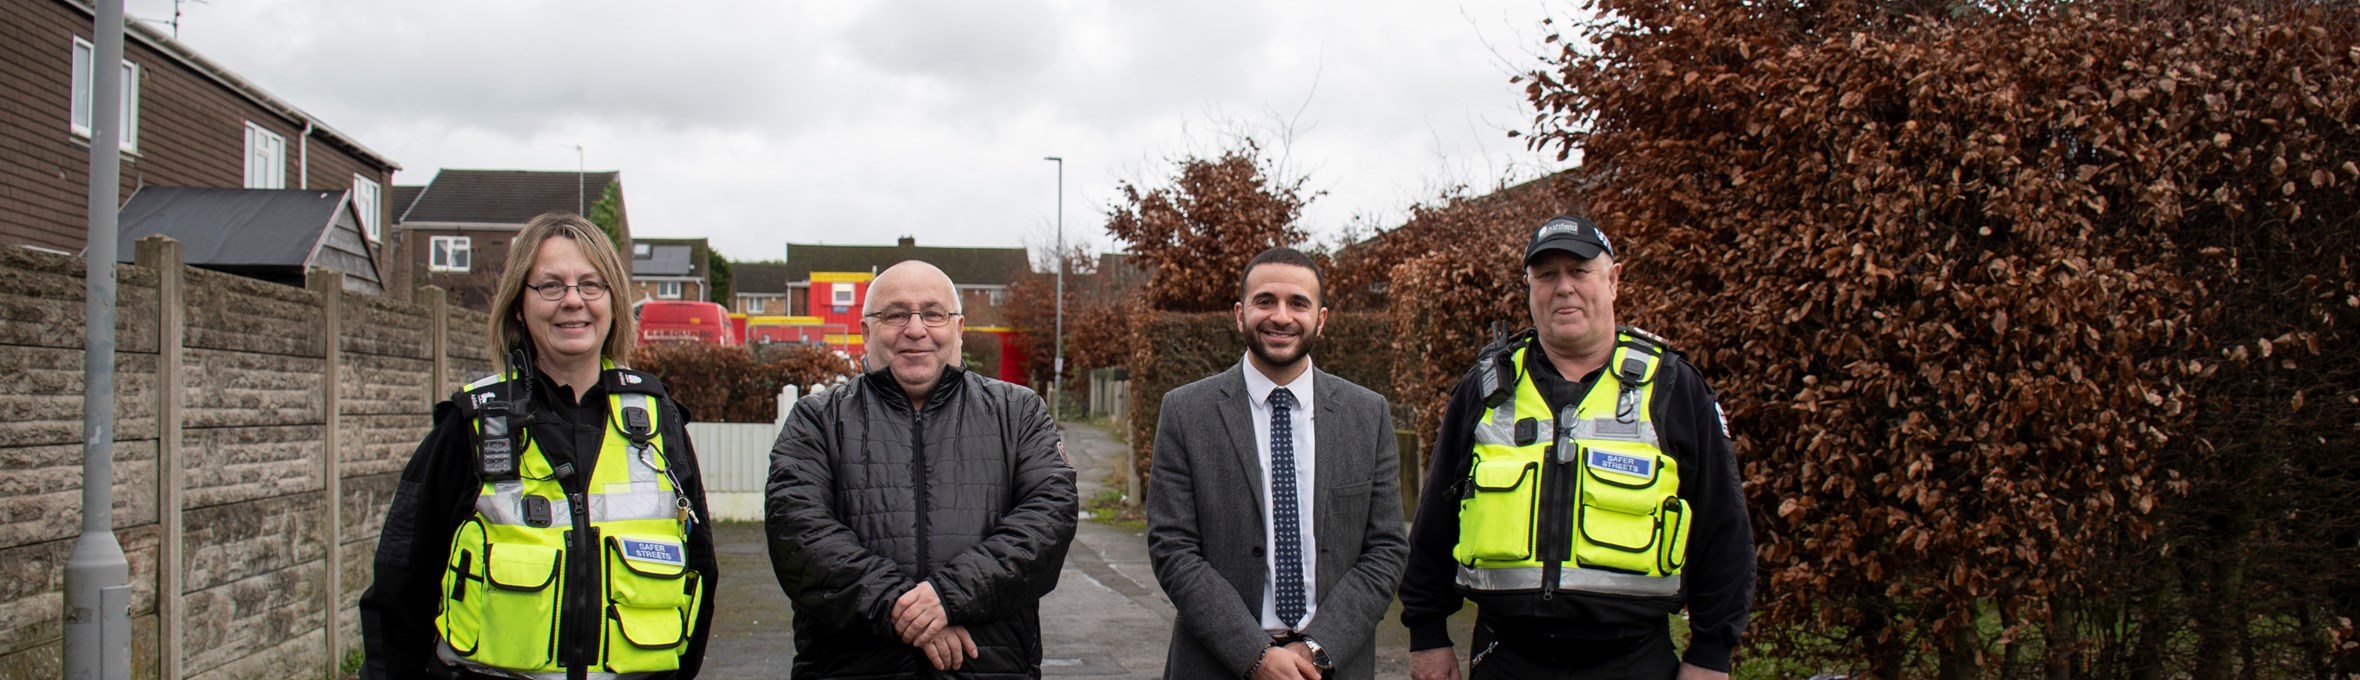 Council CPOs with Cllr Andy Meakin and Antonio Taylor on an alleyway in Coxmoor 